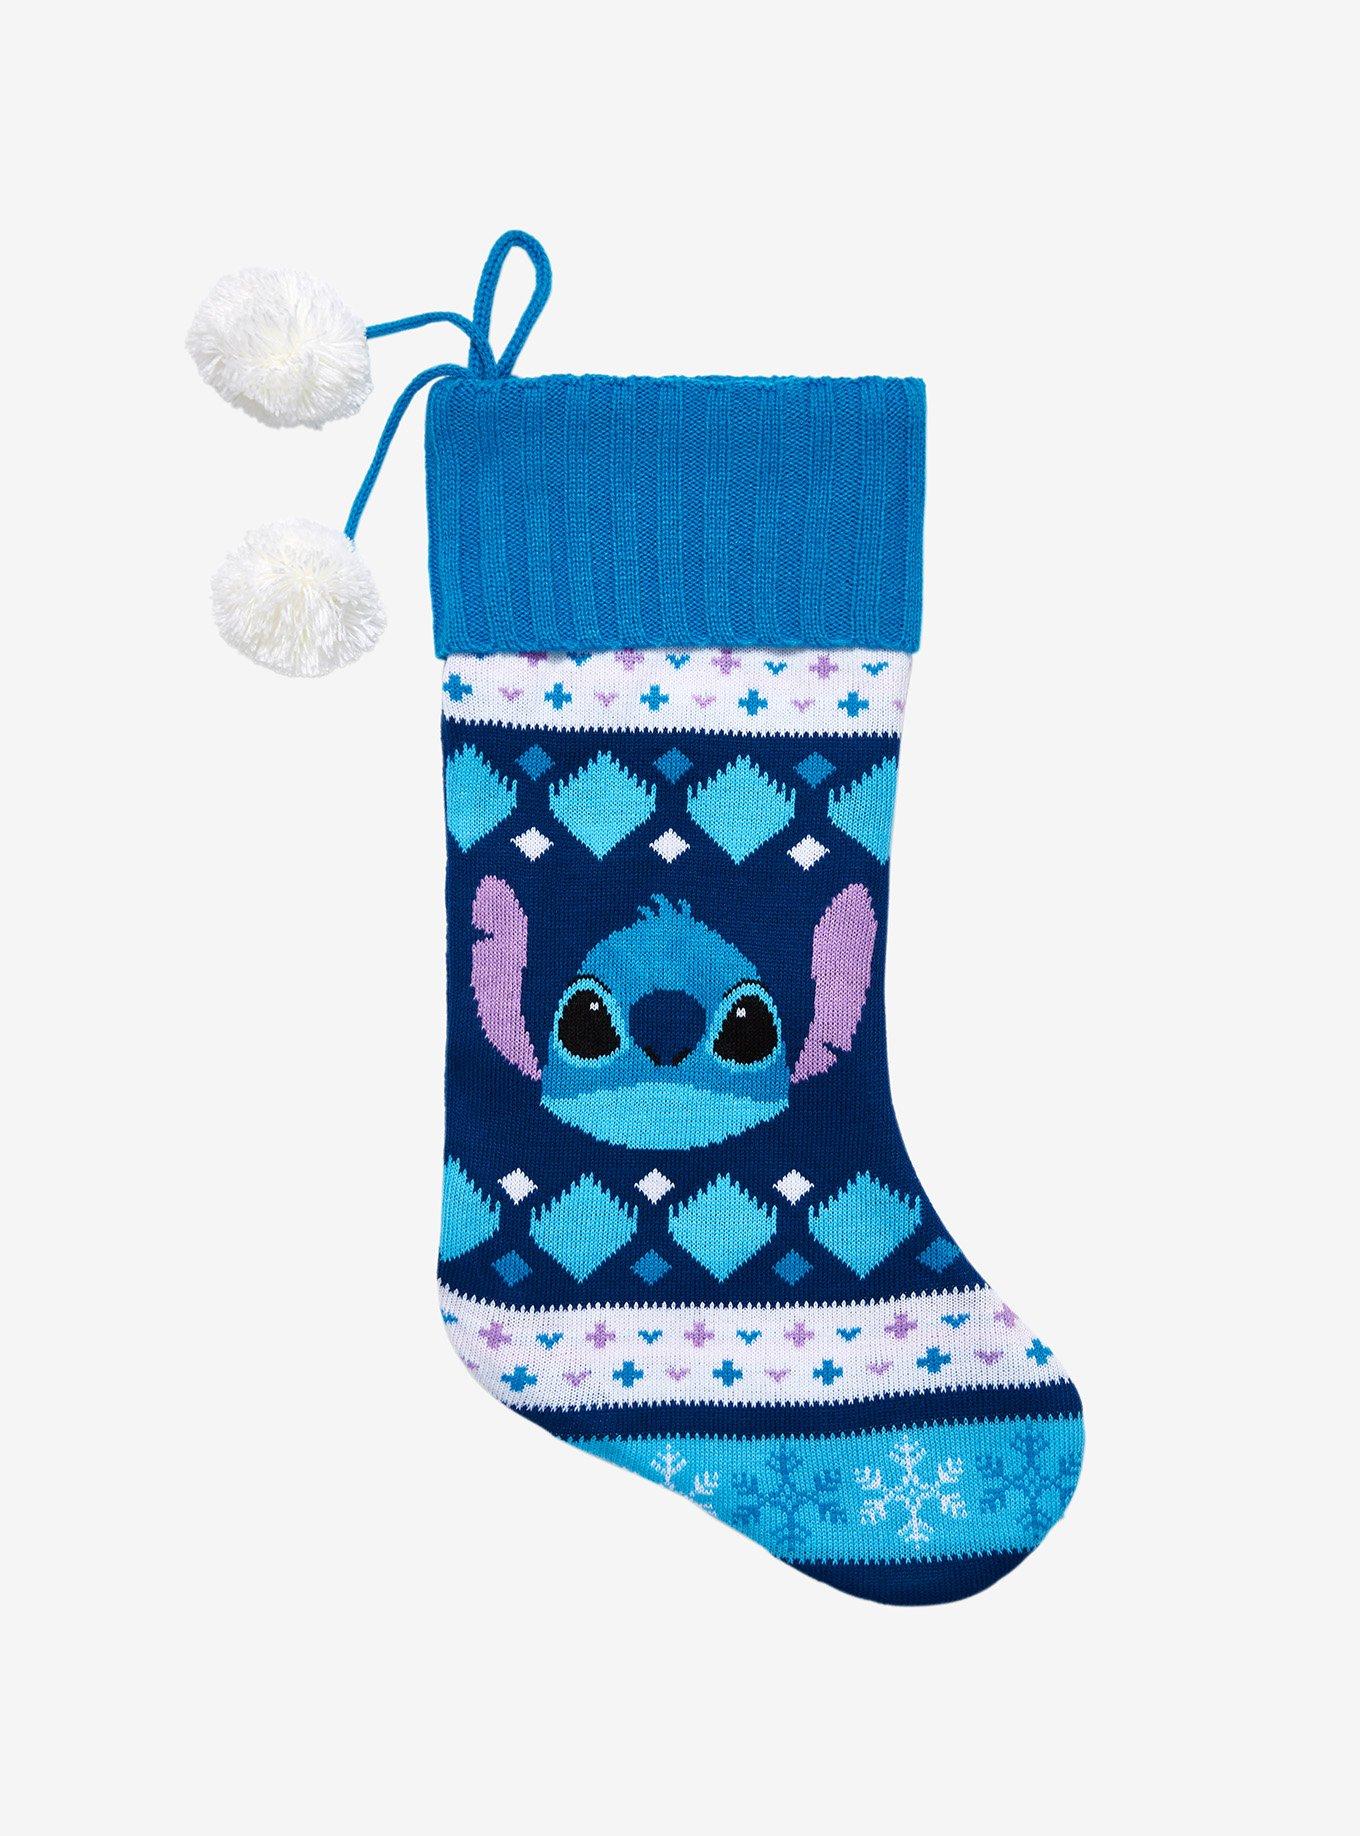 Disney Parks Holiday 2020 Lilo & Stitch Knitted Christmas Stocking